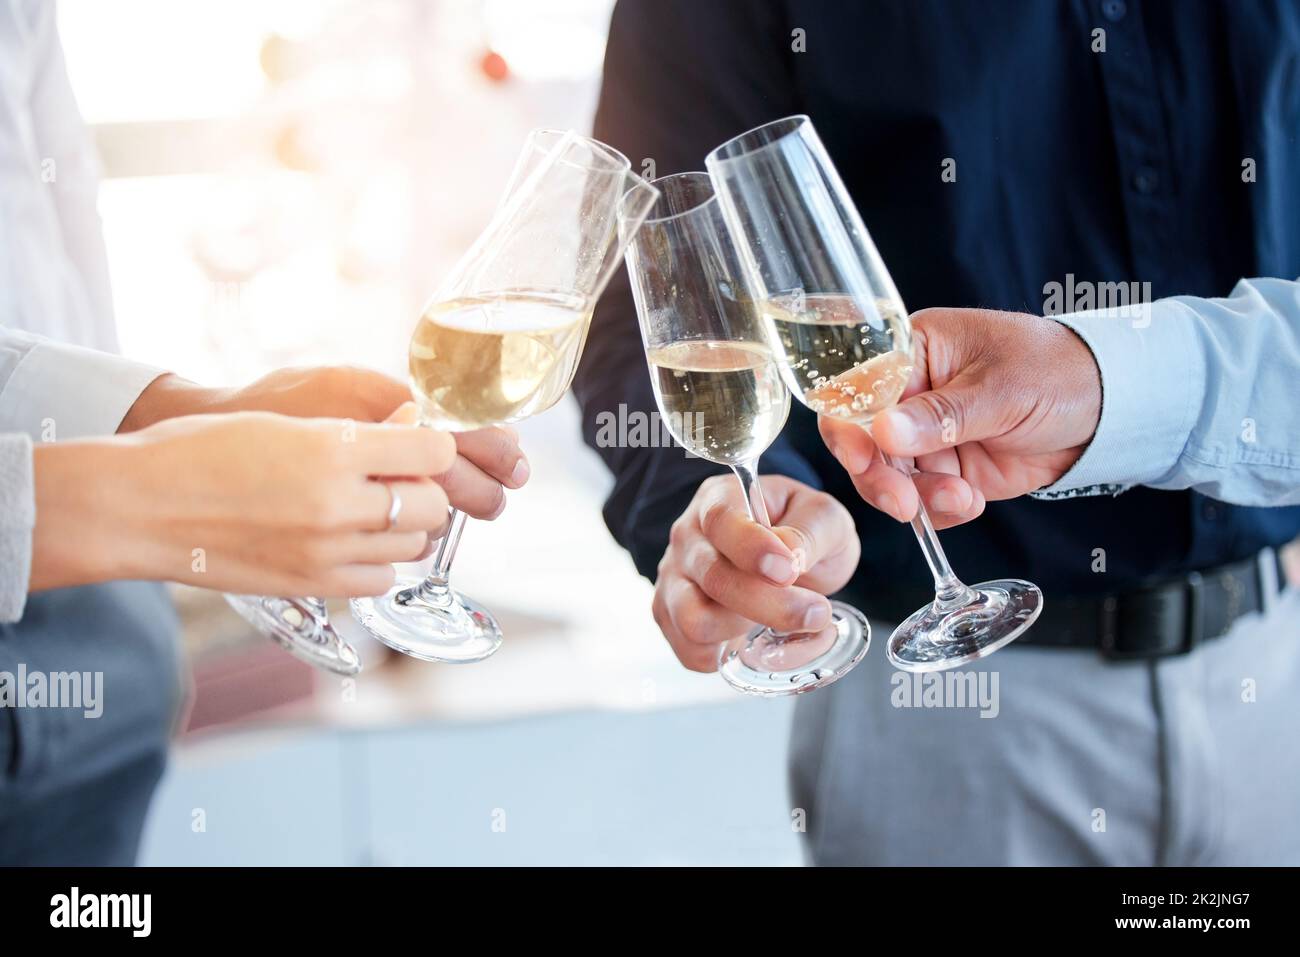 Lets toast to success. Shot of a group of unrecognizable people toasting with wine glasses. Stock Photo